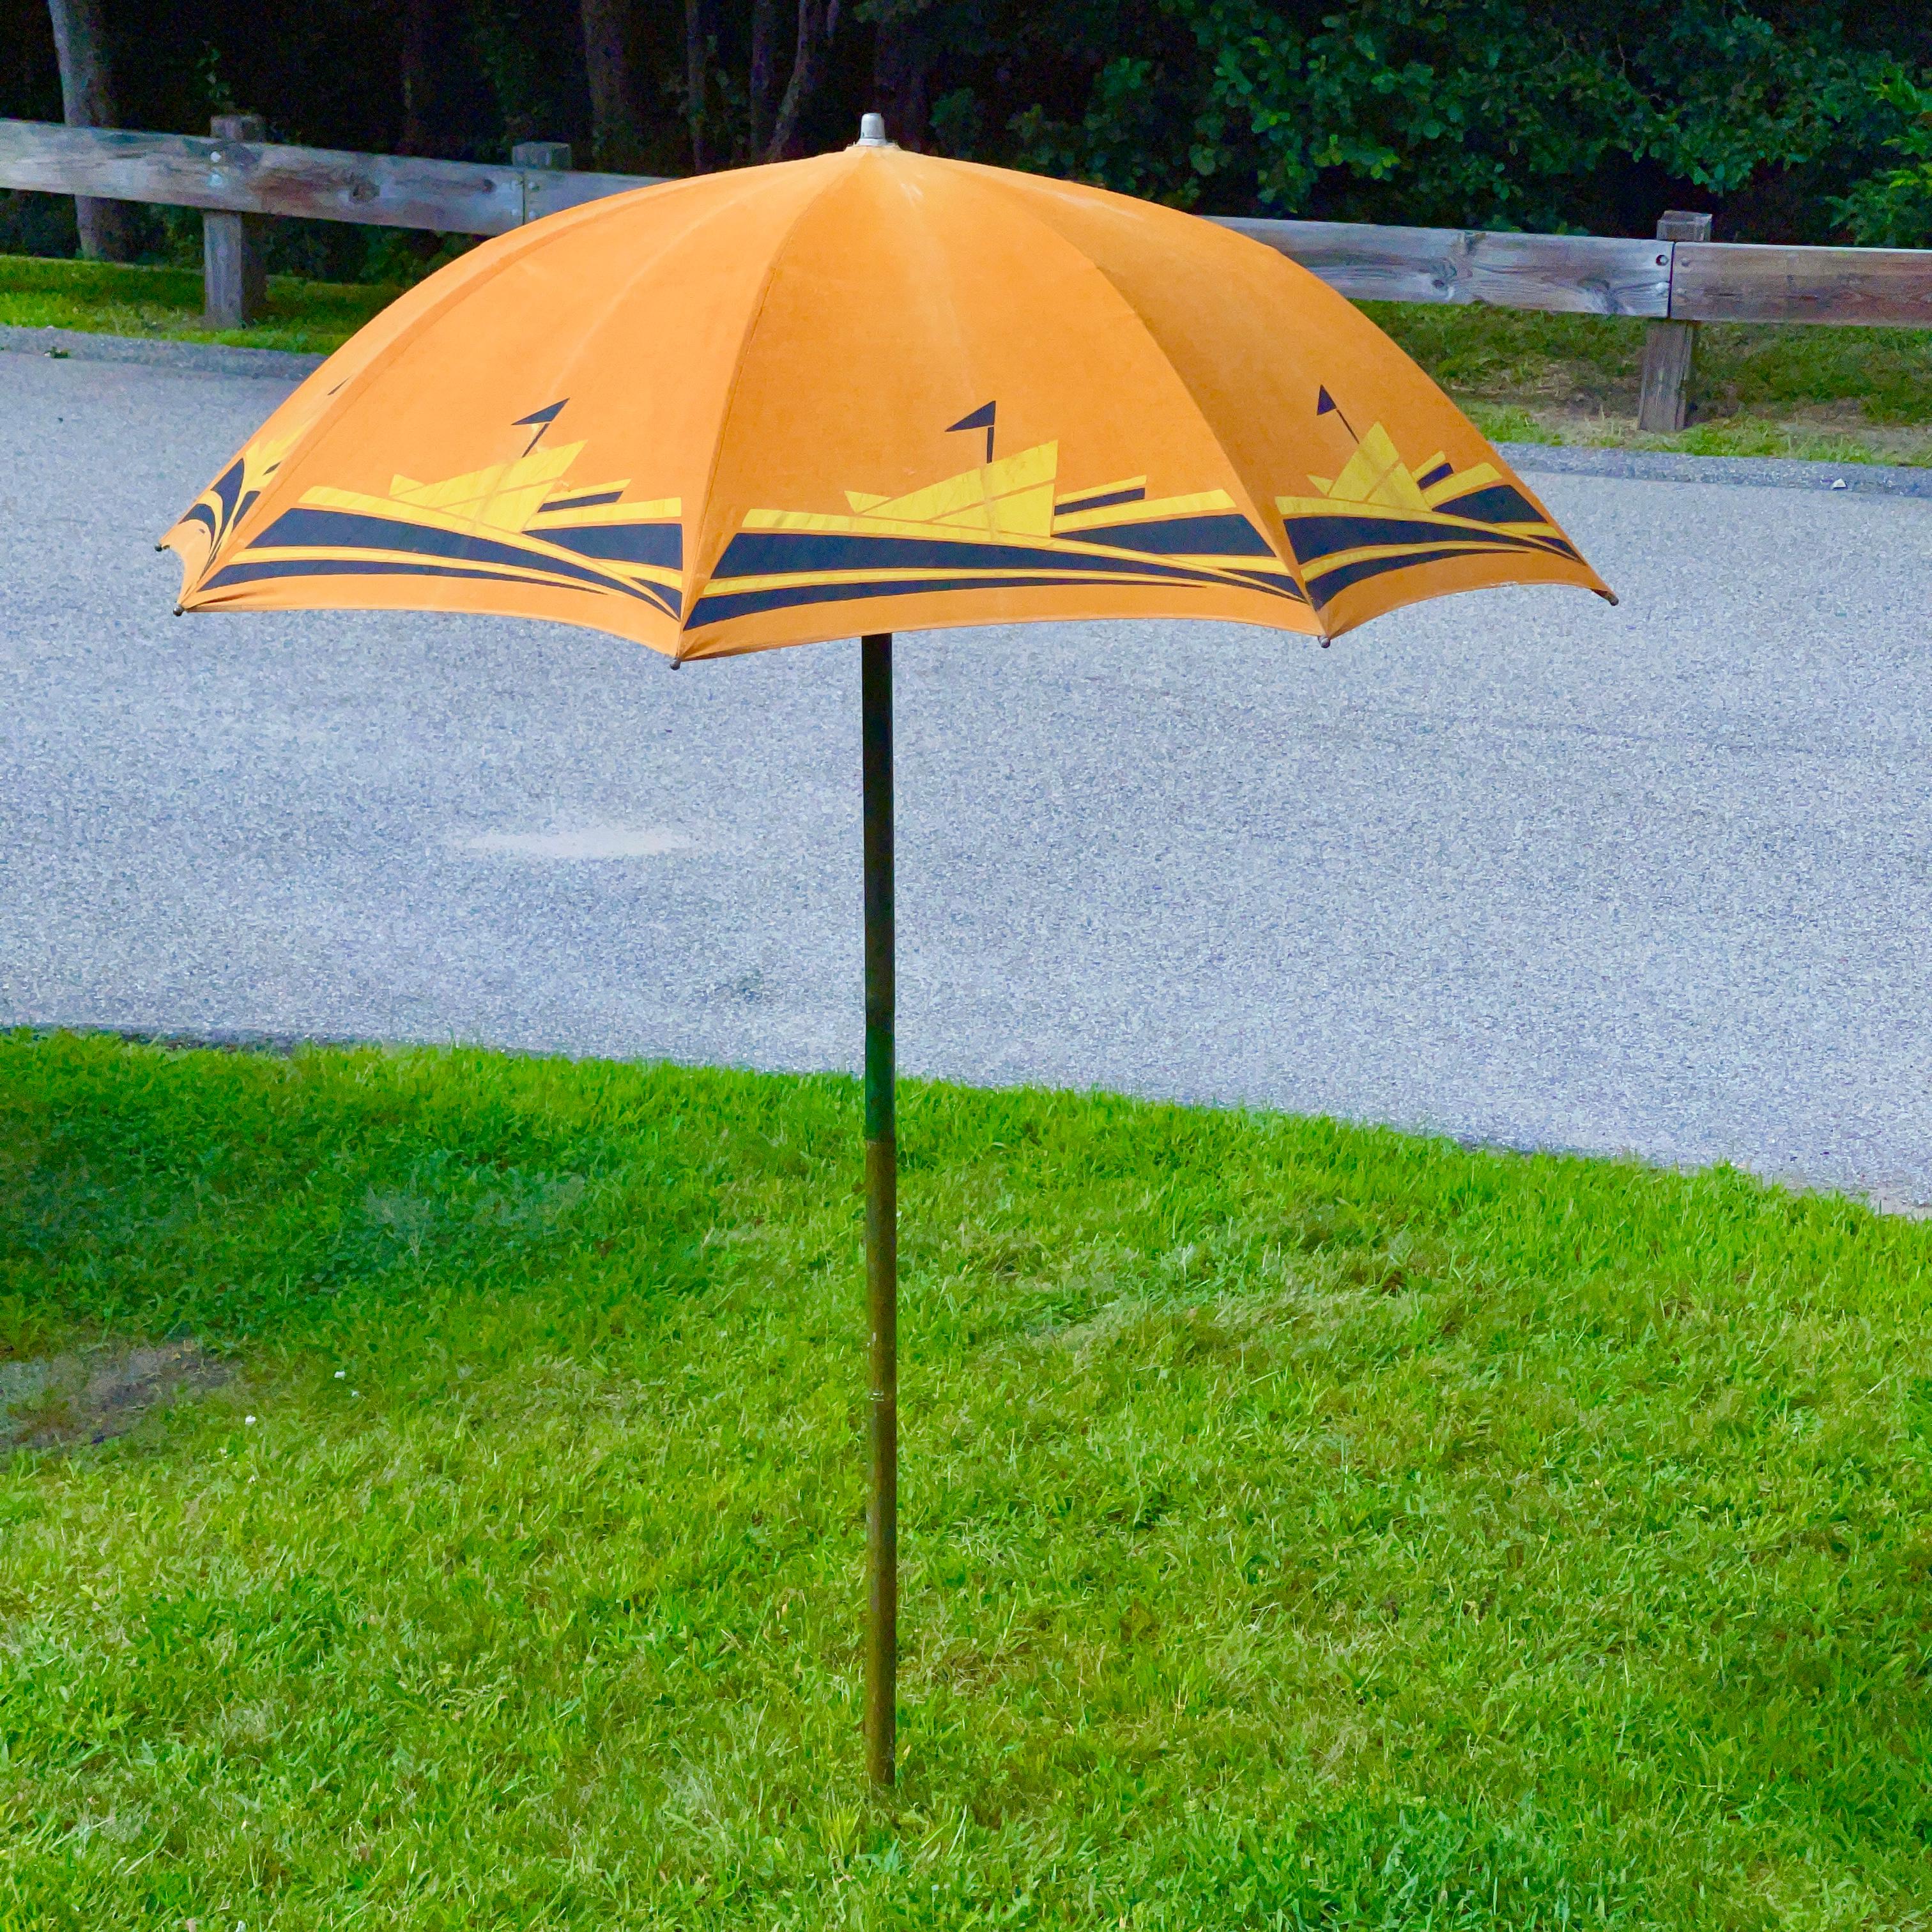 American Art Deco beach umbrella produced by the Troy Sunshade Co. circa 1936.
Highly stylized streamlined silkscreened graphic yellow and black ocean liners steaming through the waves against a brilliant orange sky. 
Cotton canvas duck on